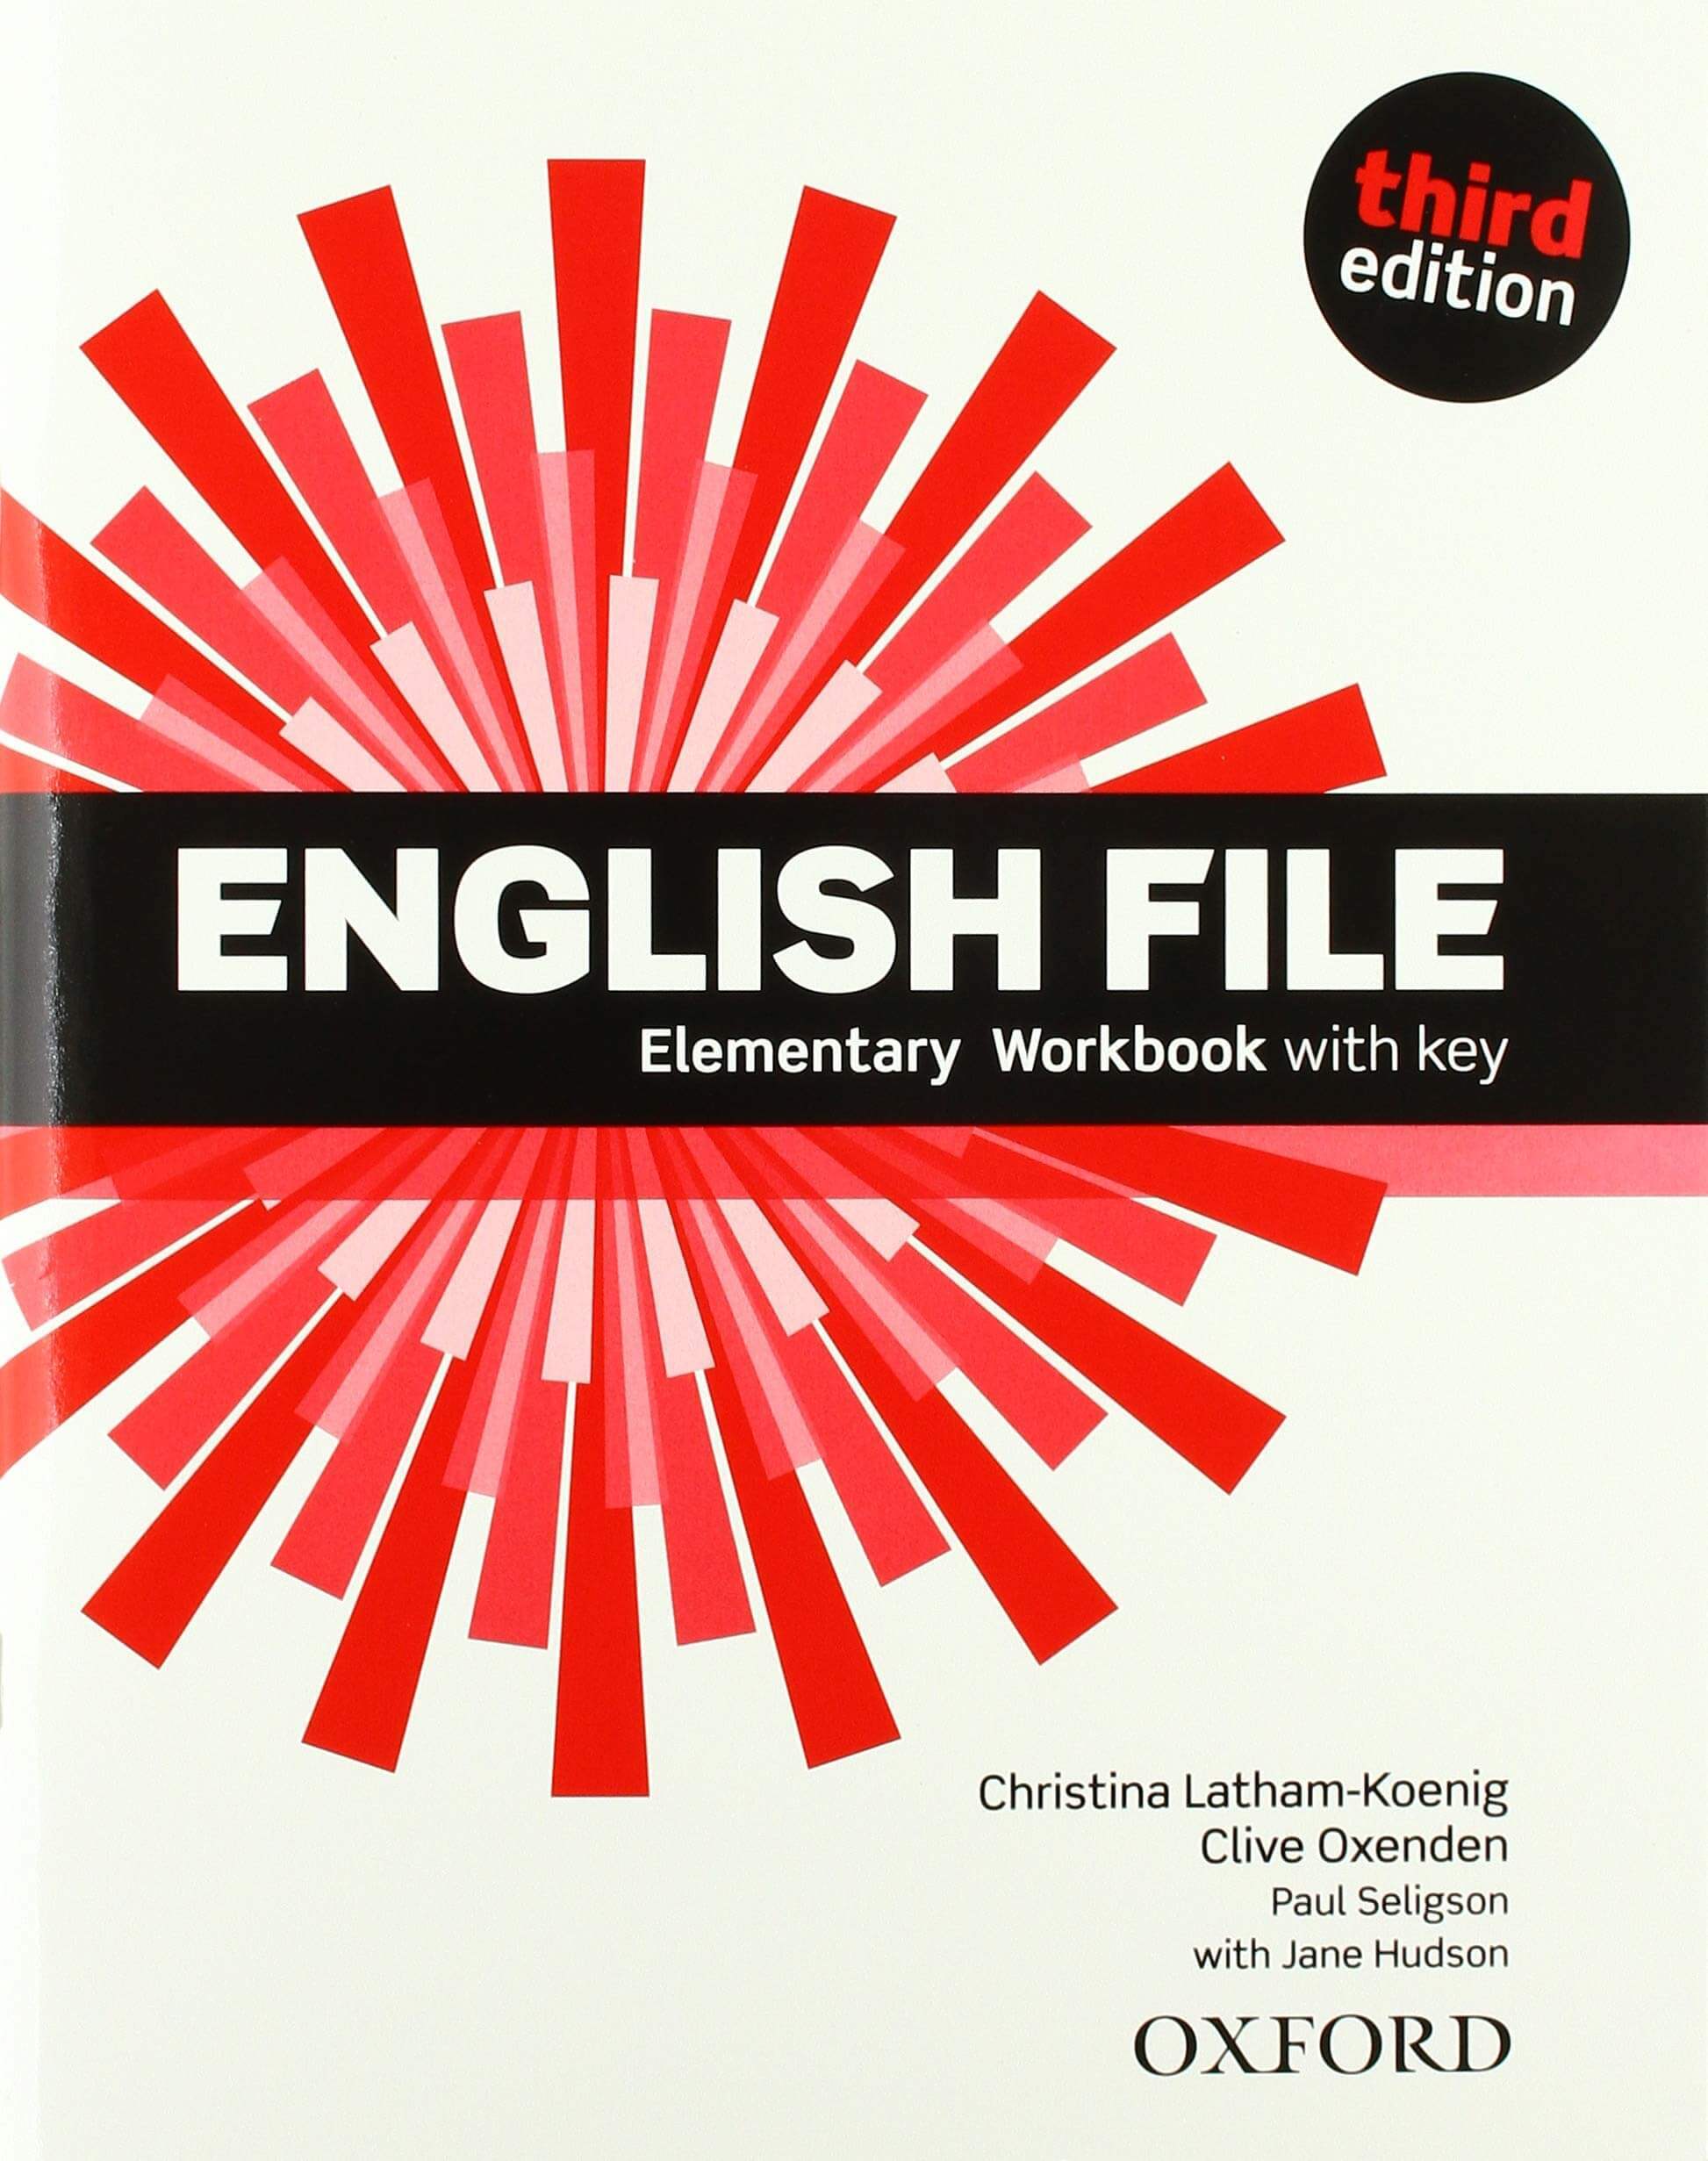 English file elementary. Oxford English file Elementary Christina Latham-Koenig Clive Oxenden. English file Elementary 3rd Edition. New English file Elementary третье издание. English file 3rd Elementary печать.